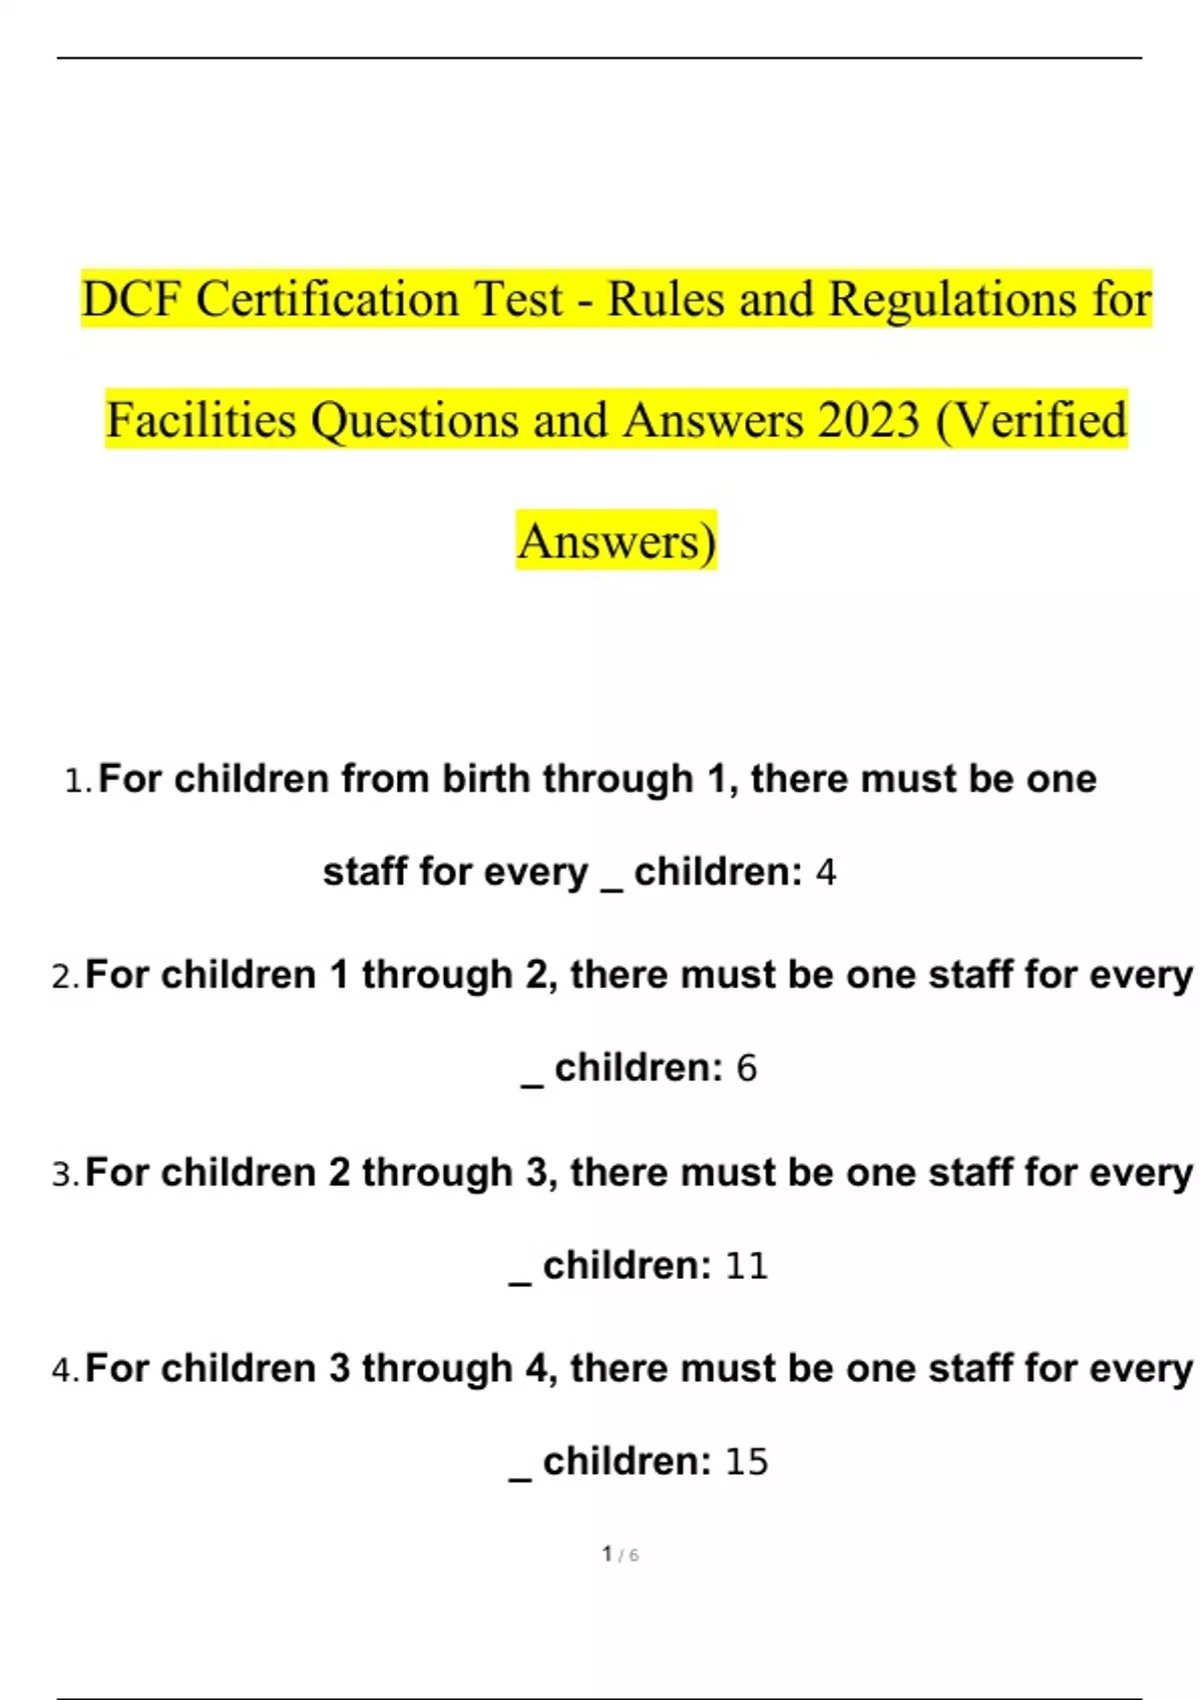 dcf-certification-test-rules-and-regulations-for-facilities-questions